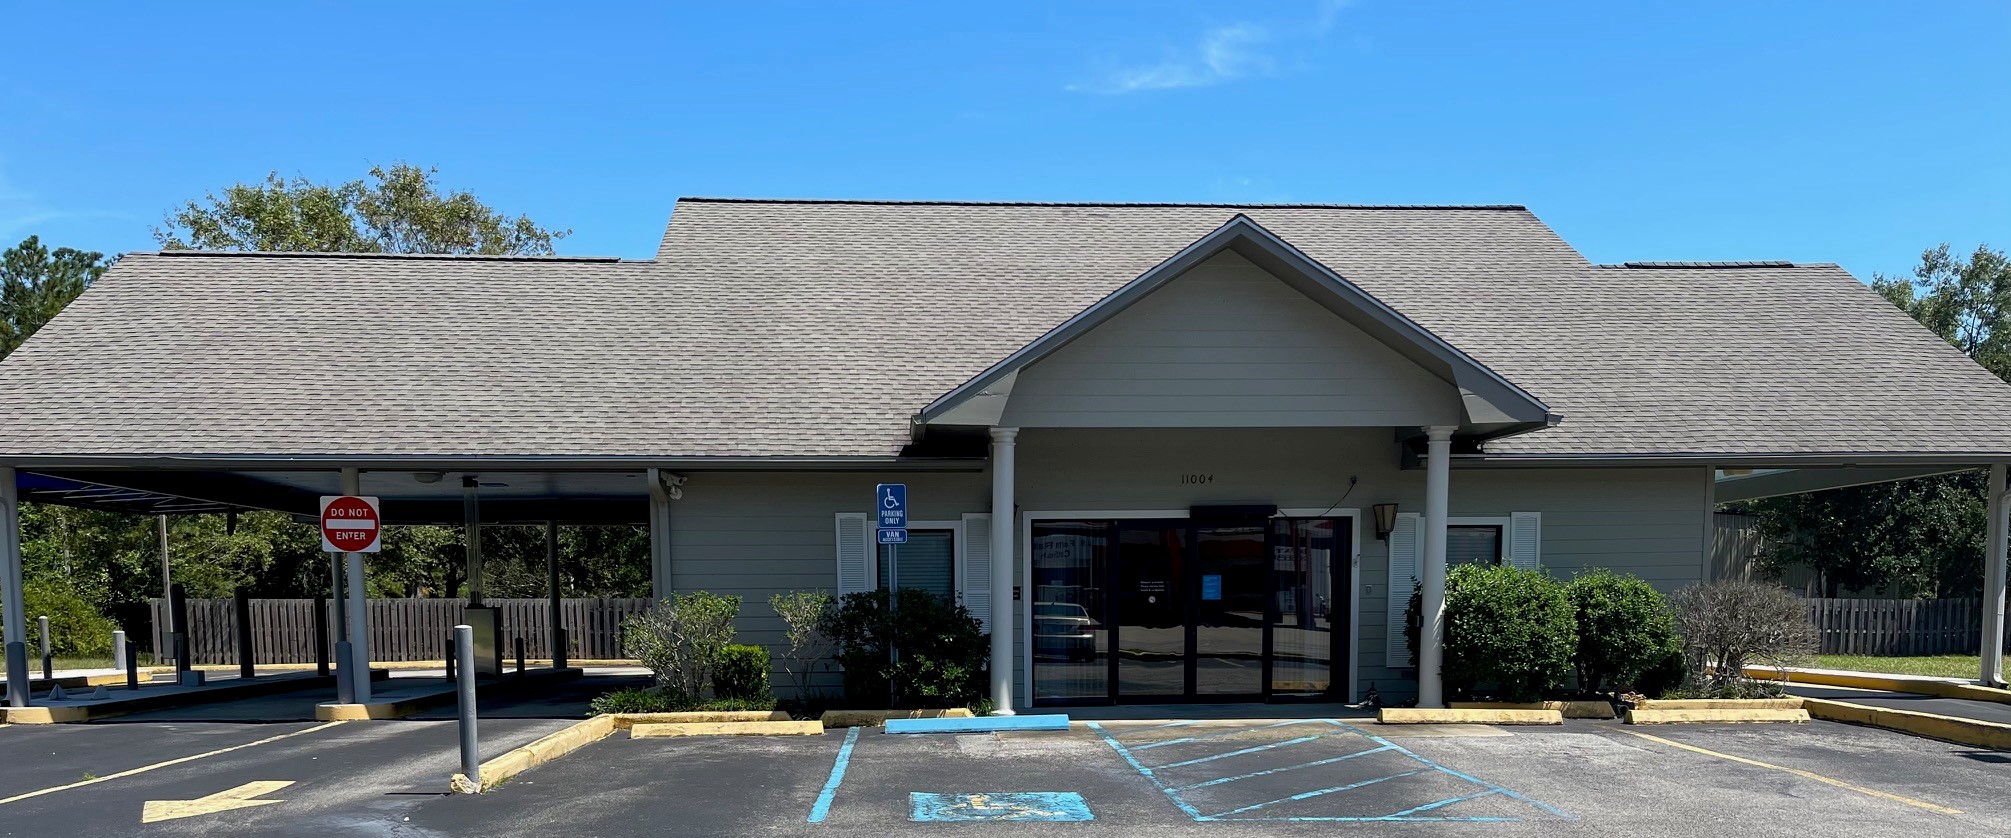 Image of new vancleave branch